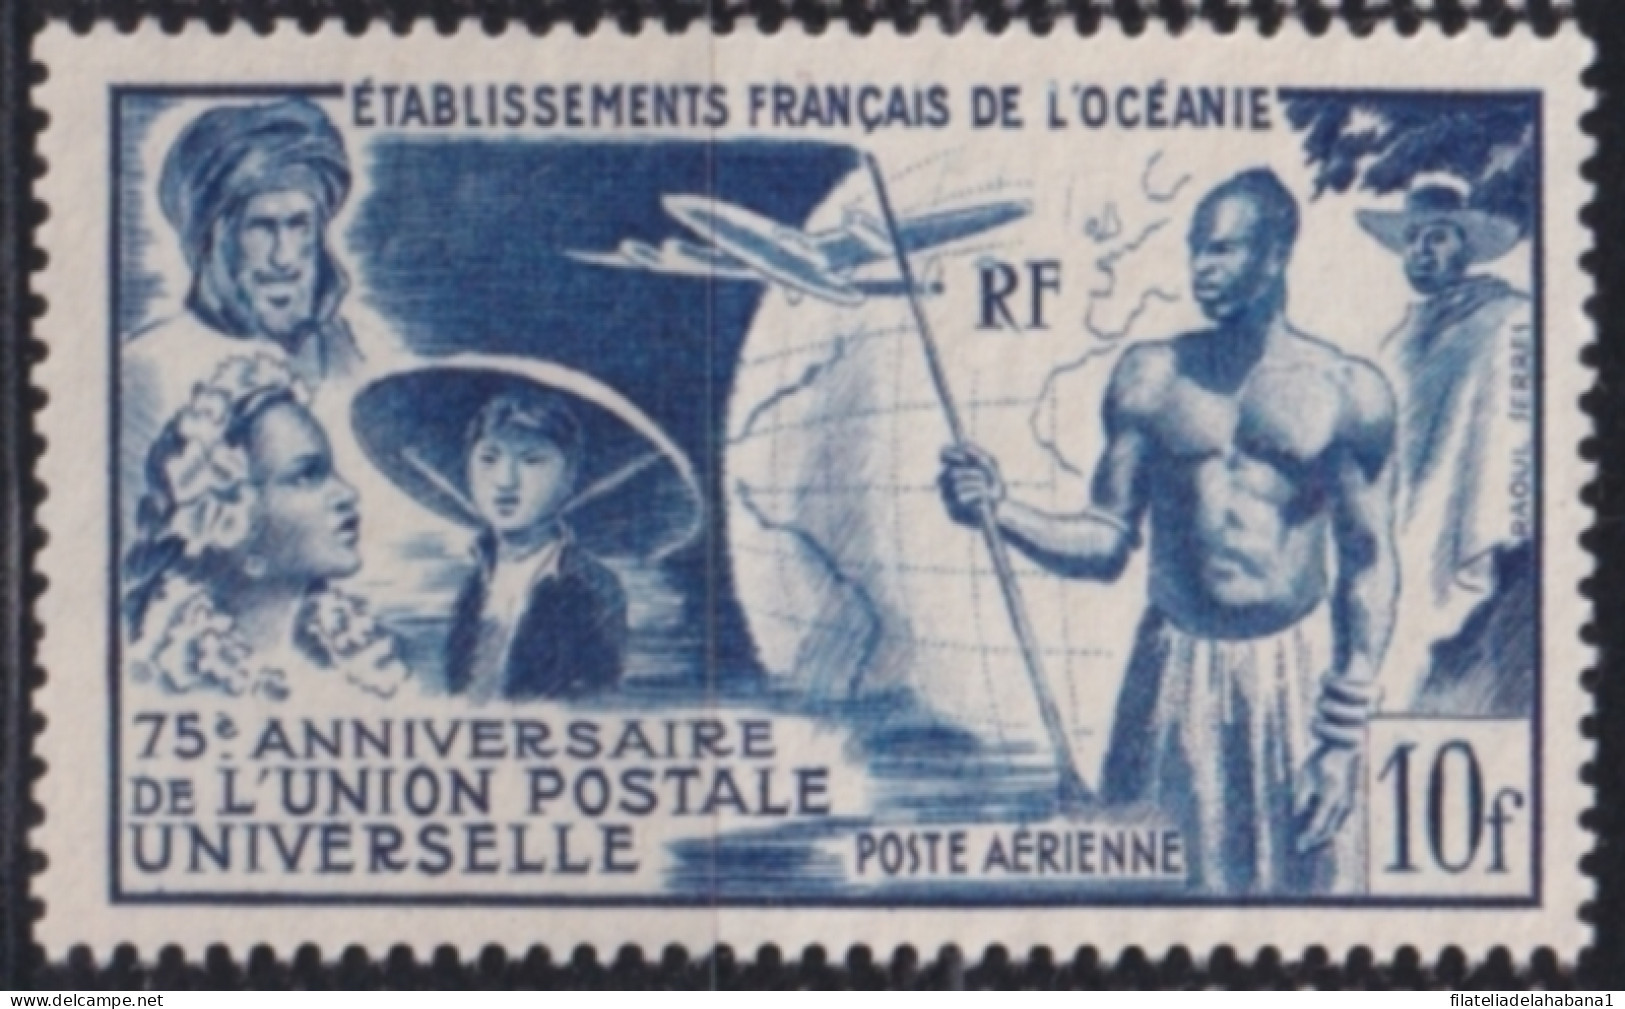 F-EX49888 OCEANIE 1949 NO GUM INDIGENOUS & COLONIAL TYPES.  - UPU (Union Postale Universelle)